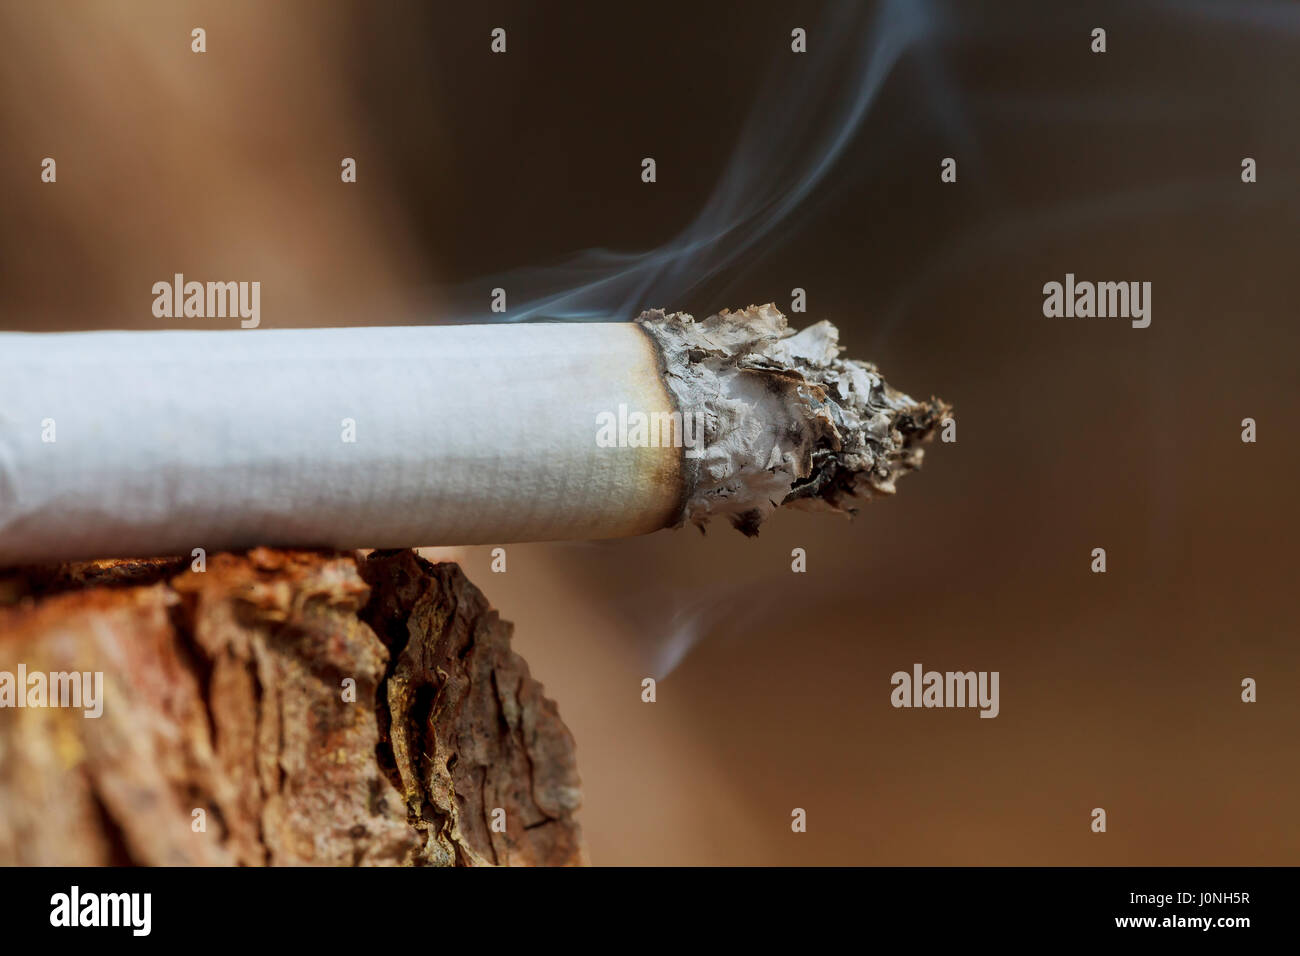 Cigarette with smoke on wooden background Cigarette smoking Stock Photo